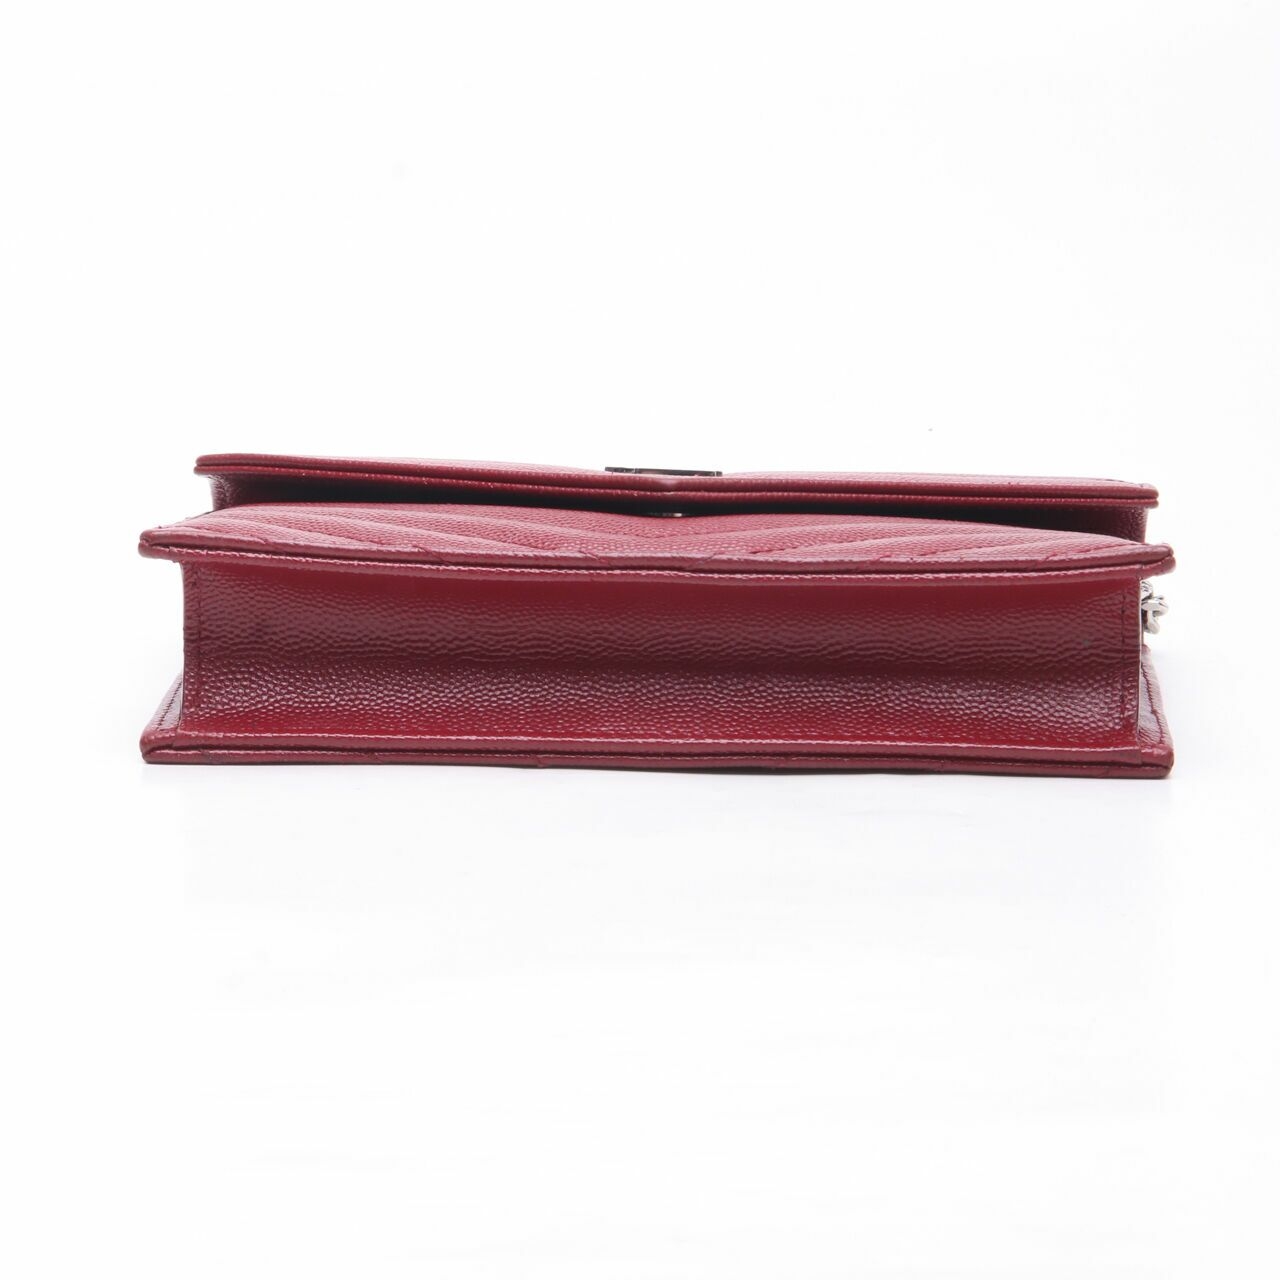 Yves Saint Laurent Red Maroon SHW Wallet On Chain